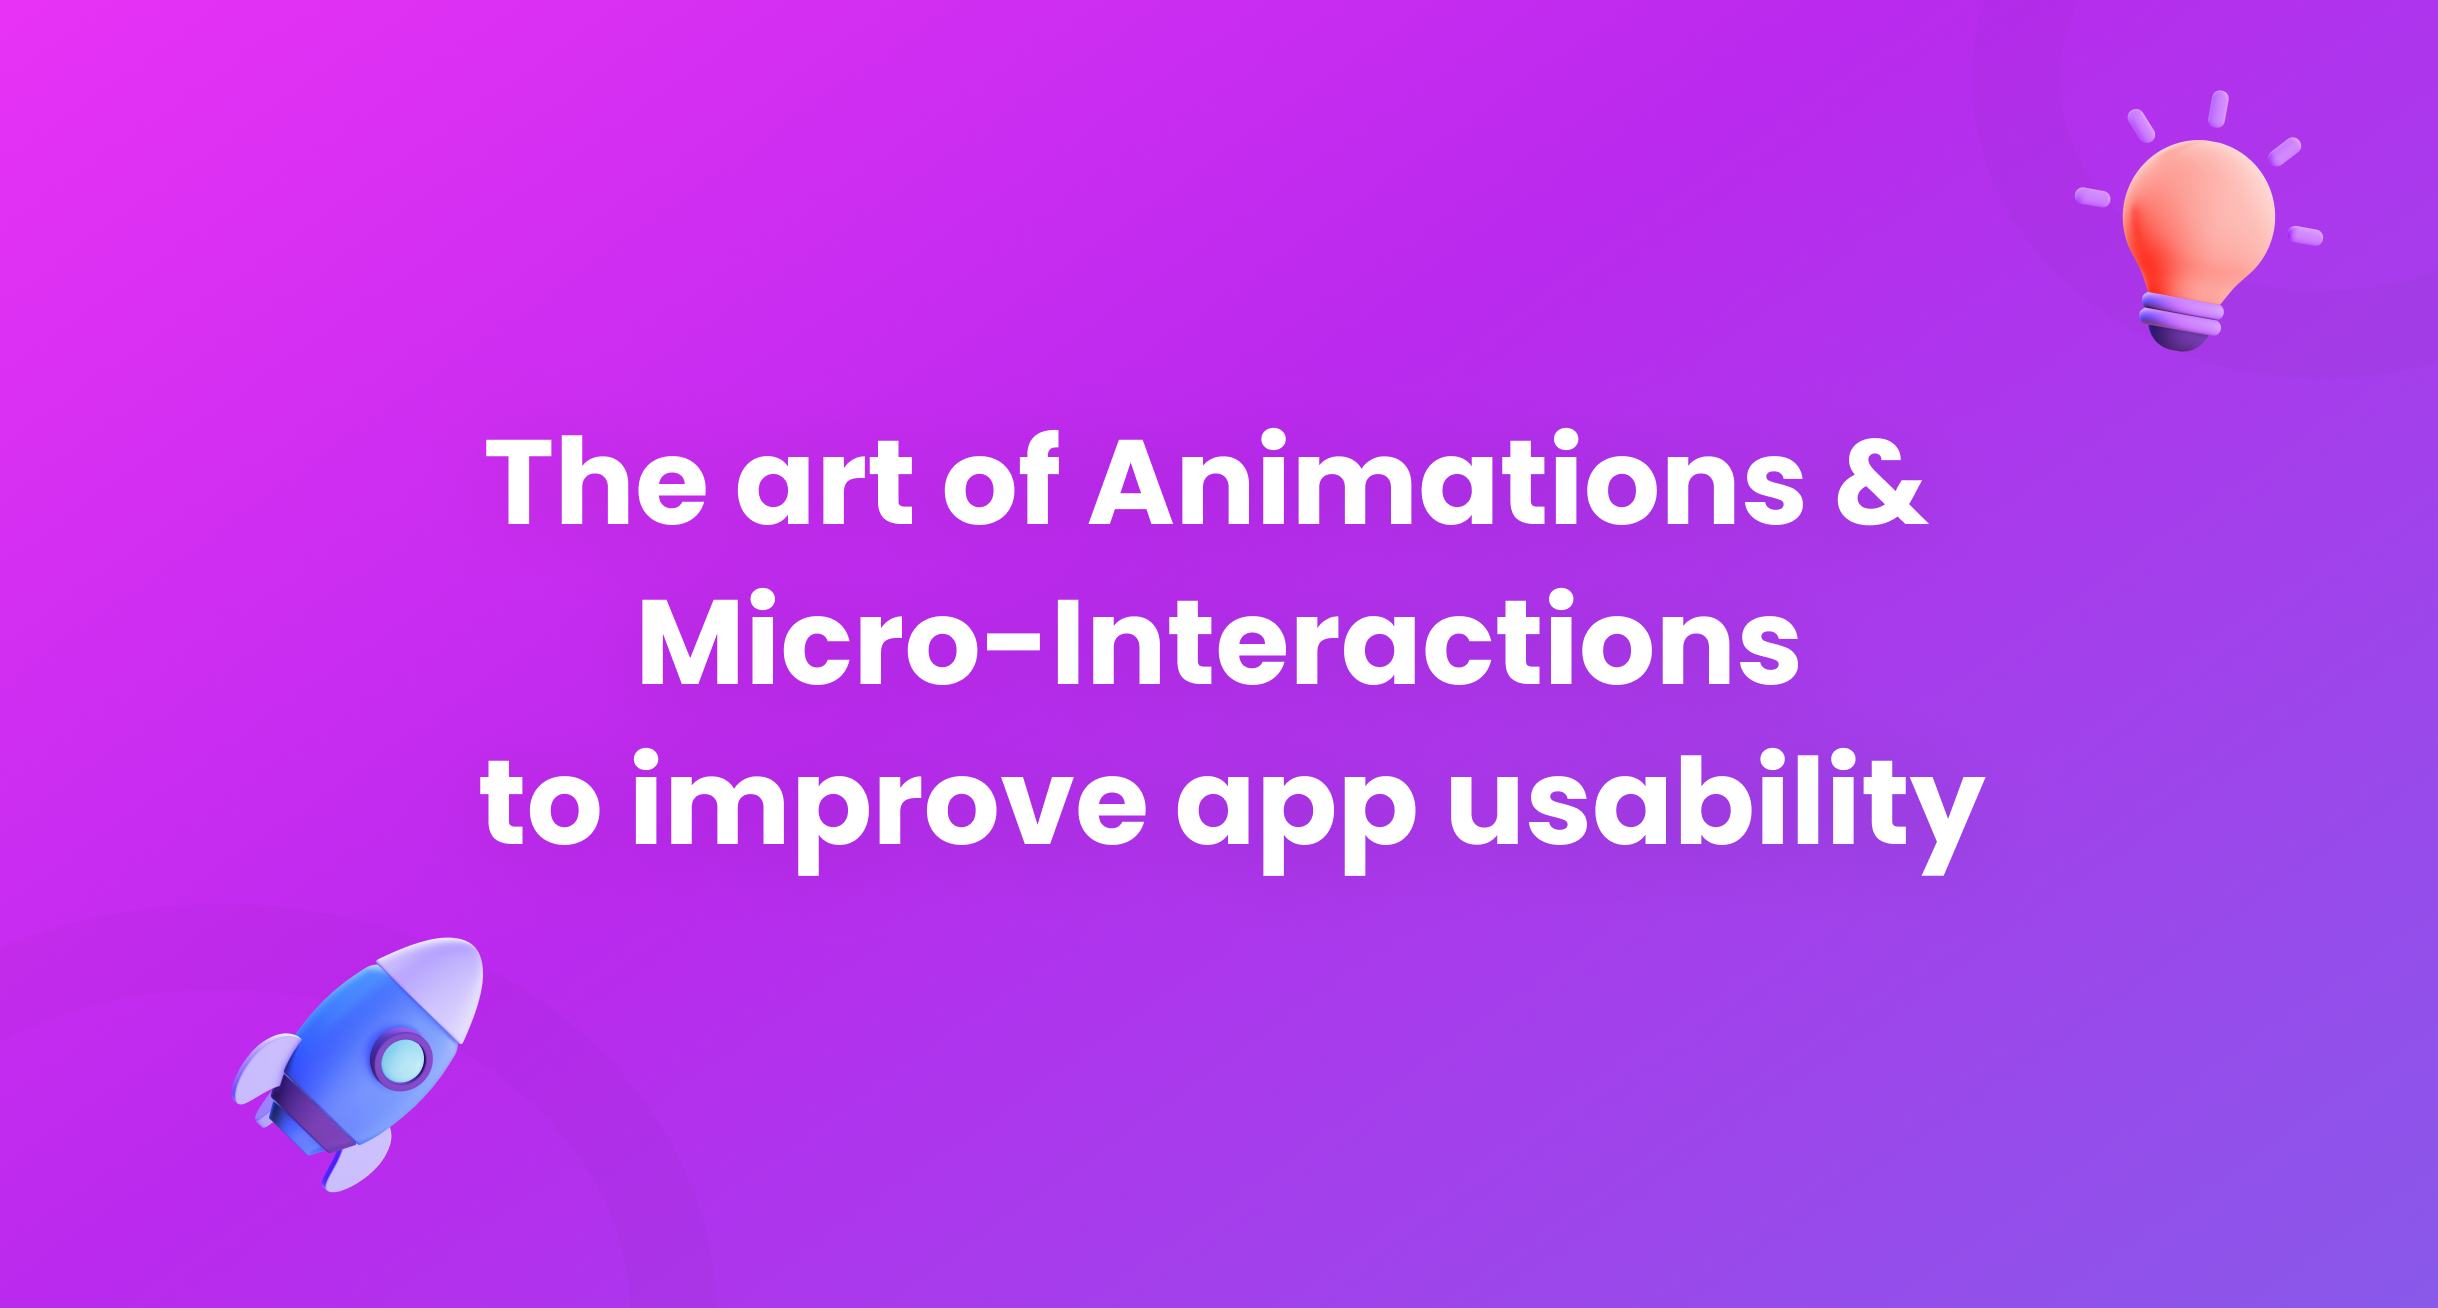 Nightborn - The art of animations & micro-interactions to improve app usability